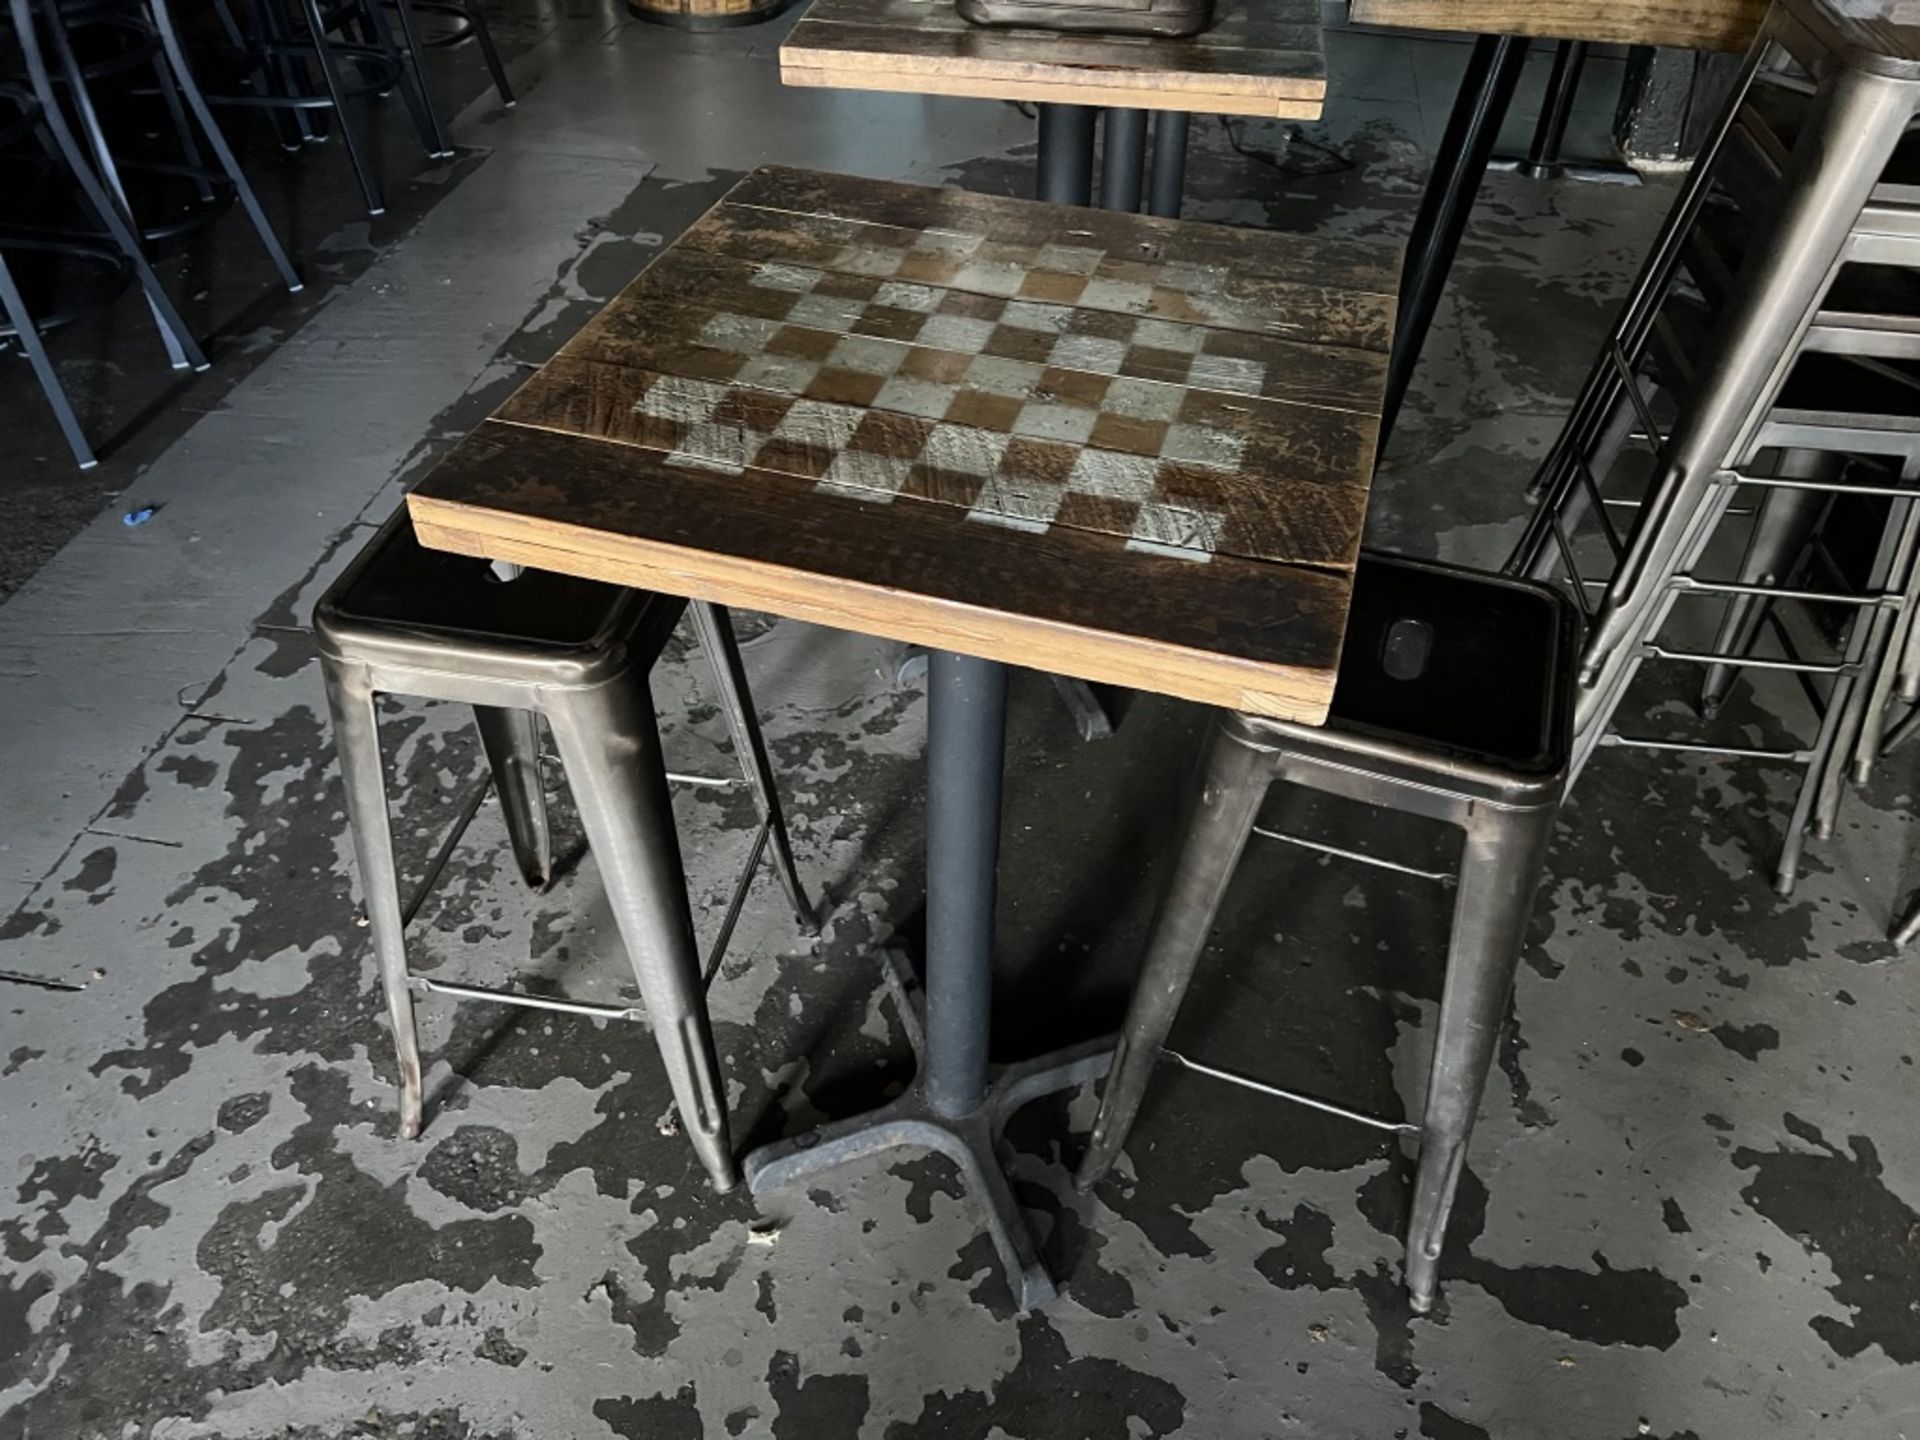 LOT OF: (1) 24" X 24" HI-TOP SQUARE TABLE WITH CHESS/CHECKERS LAYOUT AND (2) METAL STOOLS - Image 3 of 3